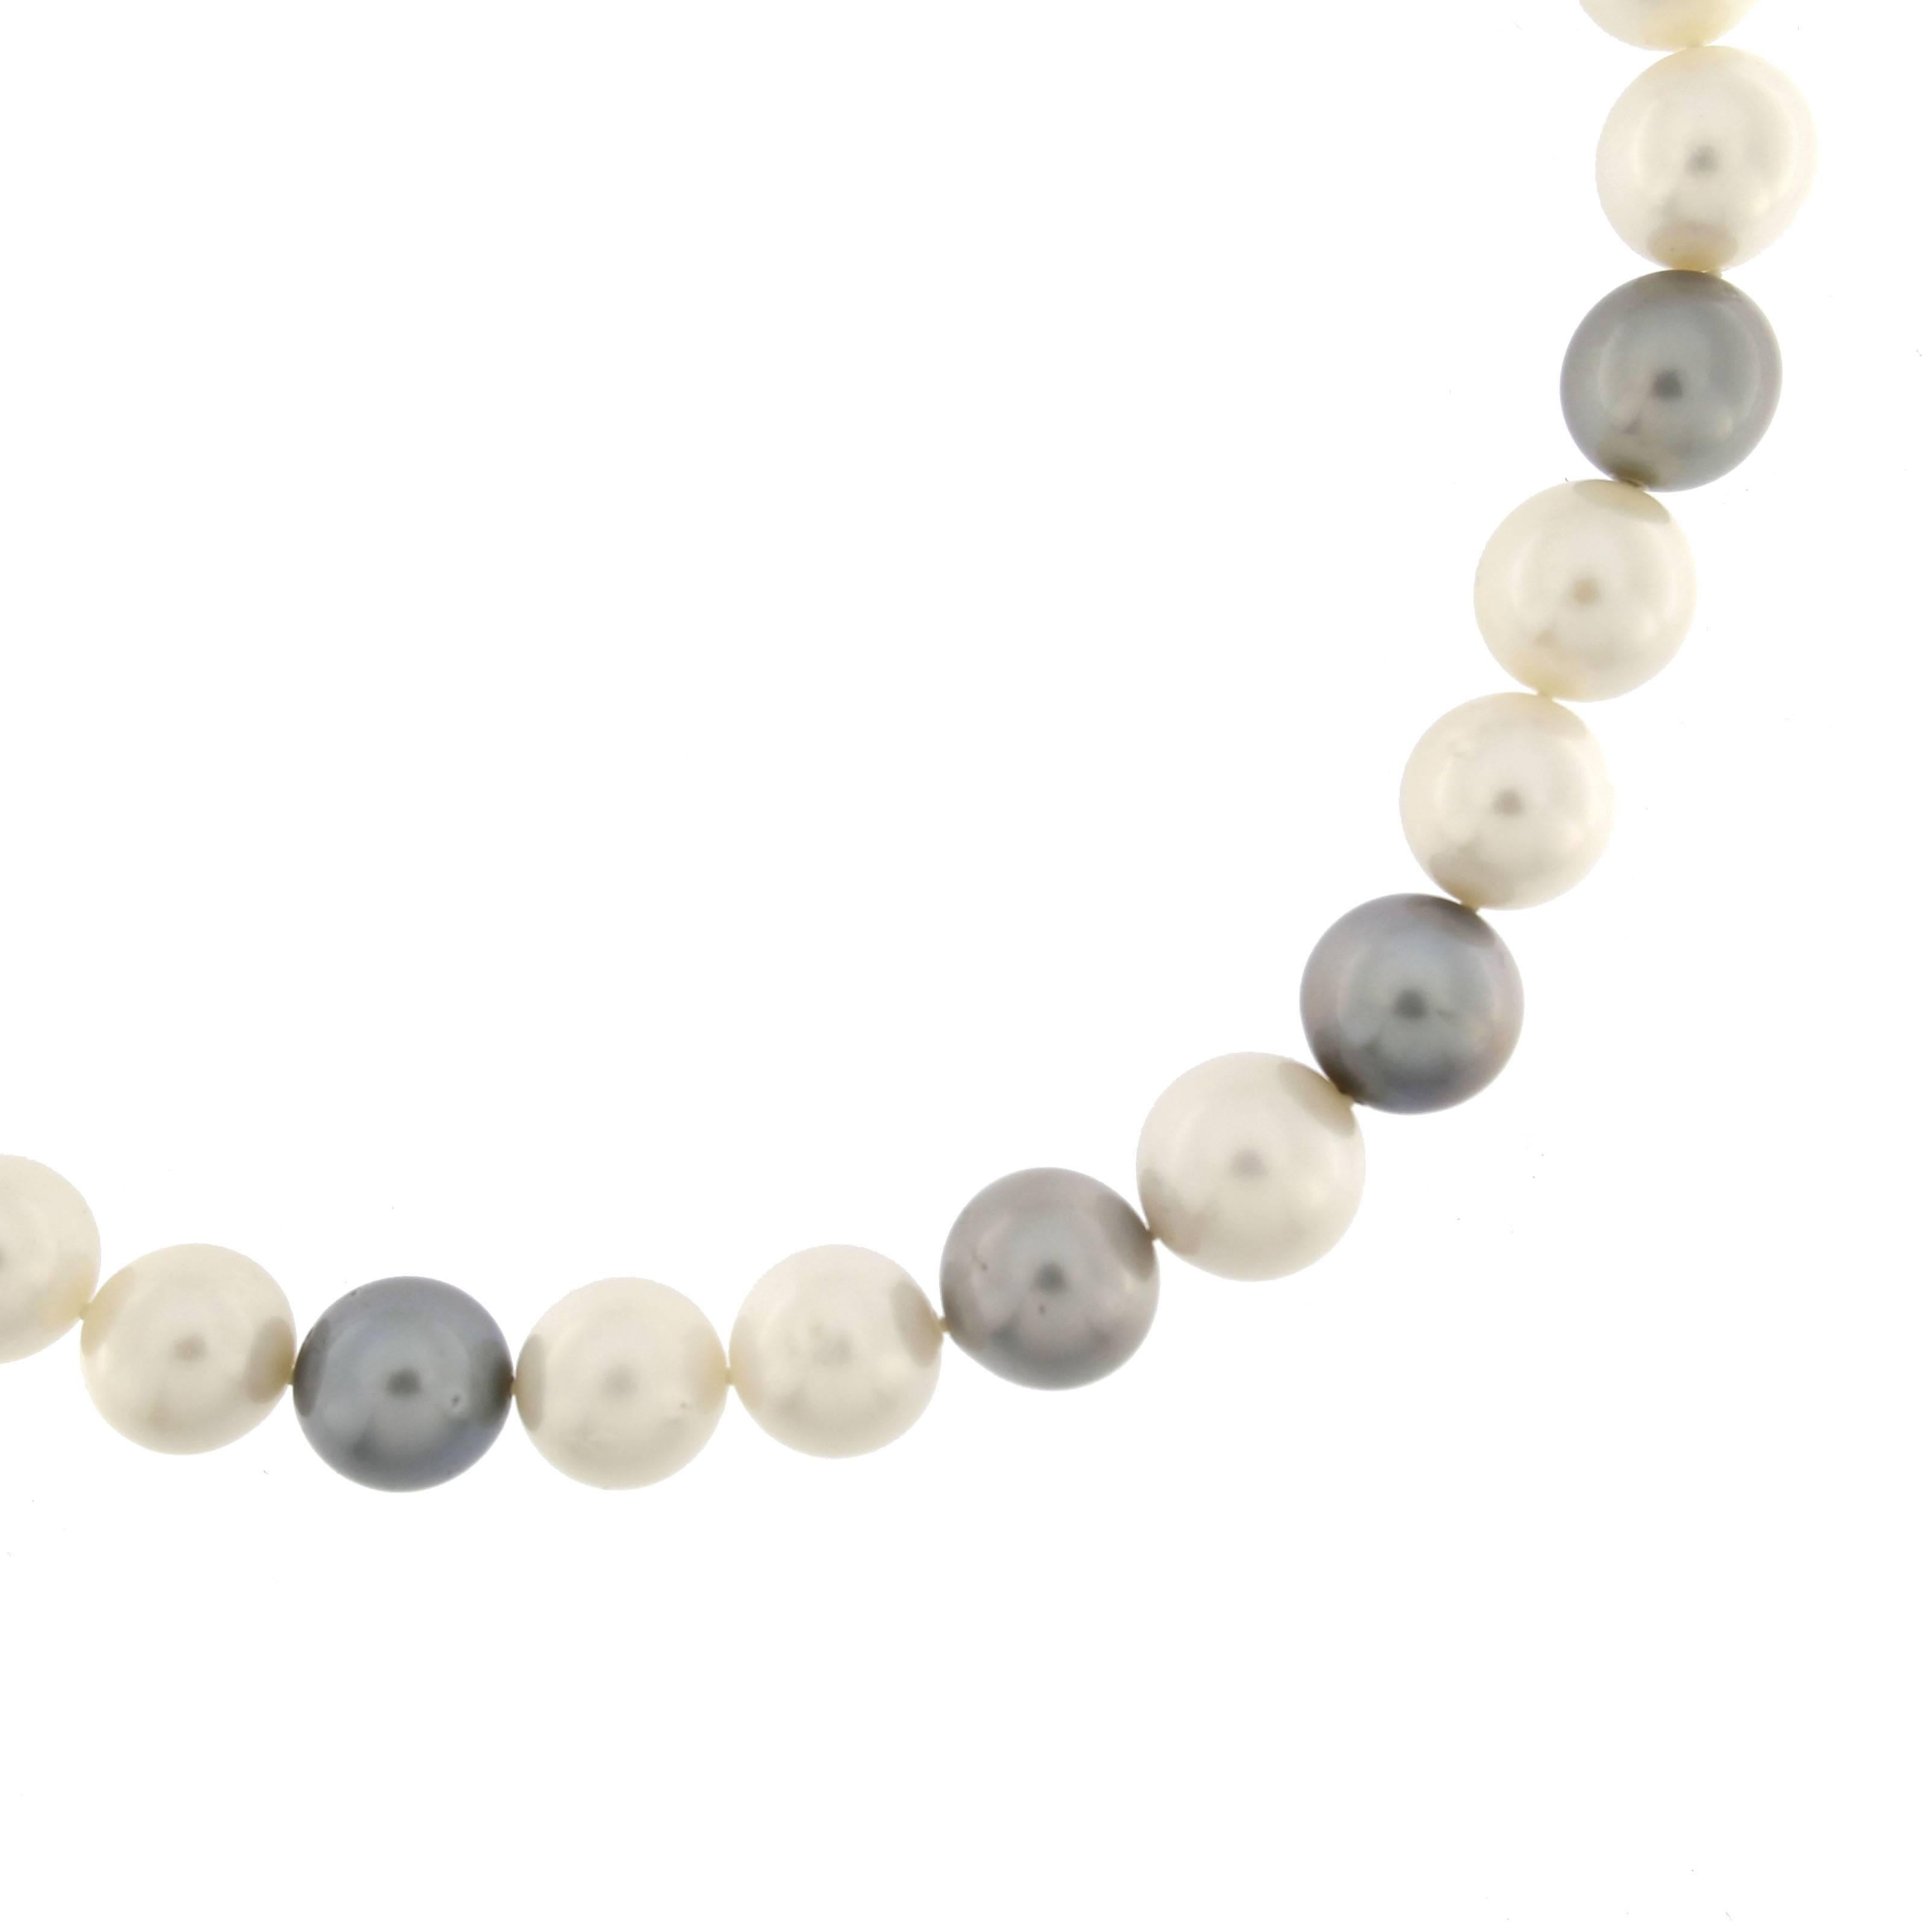 Long pearl necklace by Jona, composed by 47 South Sea pearls alternating with 20 light grey Tahiti pearls ranging from 11 to 13 mm ( 0.43 in-0.51 in) diameter, total length: 32.68 inch/83 cm), strung on a hand-knotted silk cord and secured by a